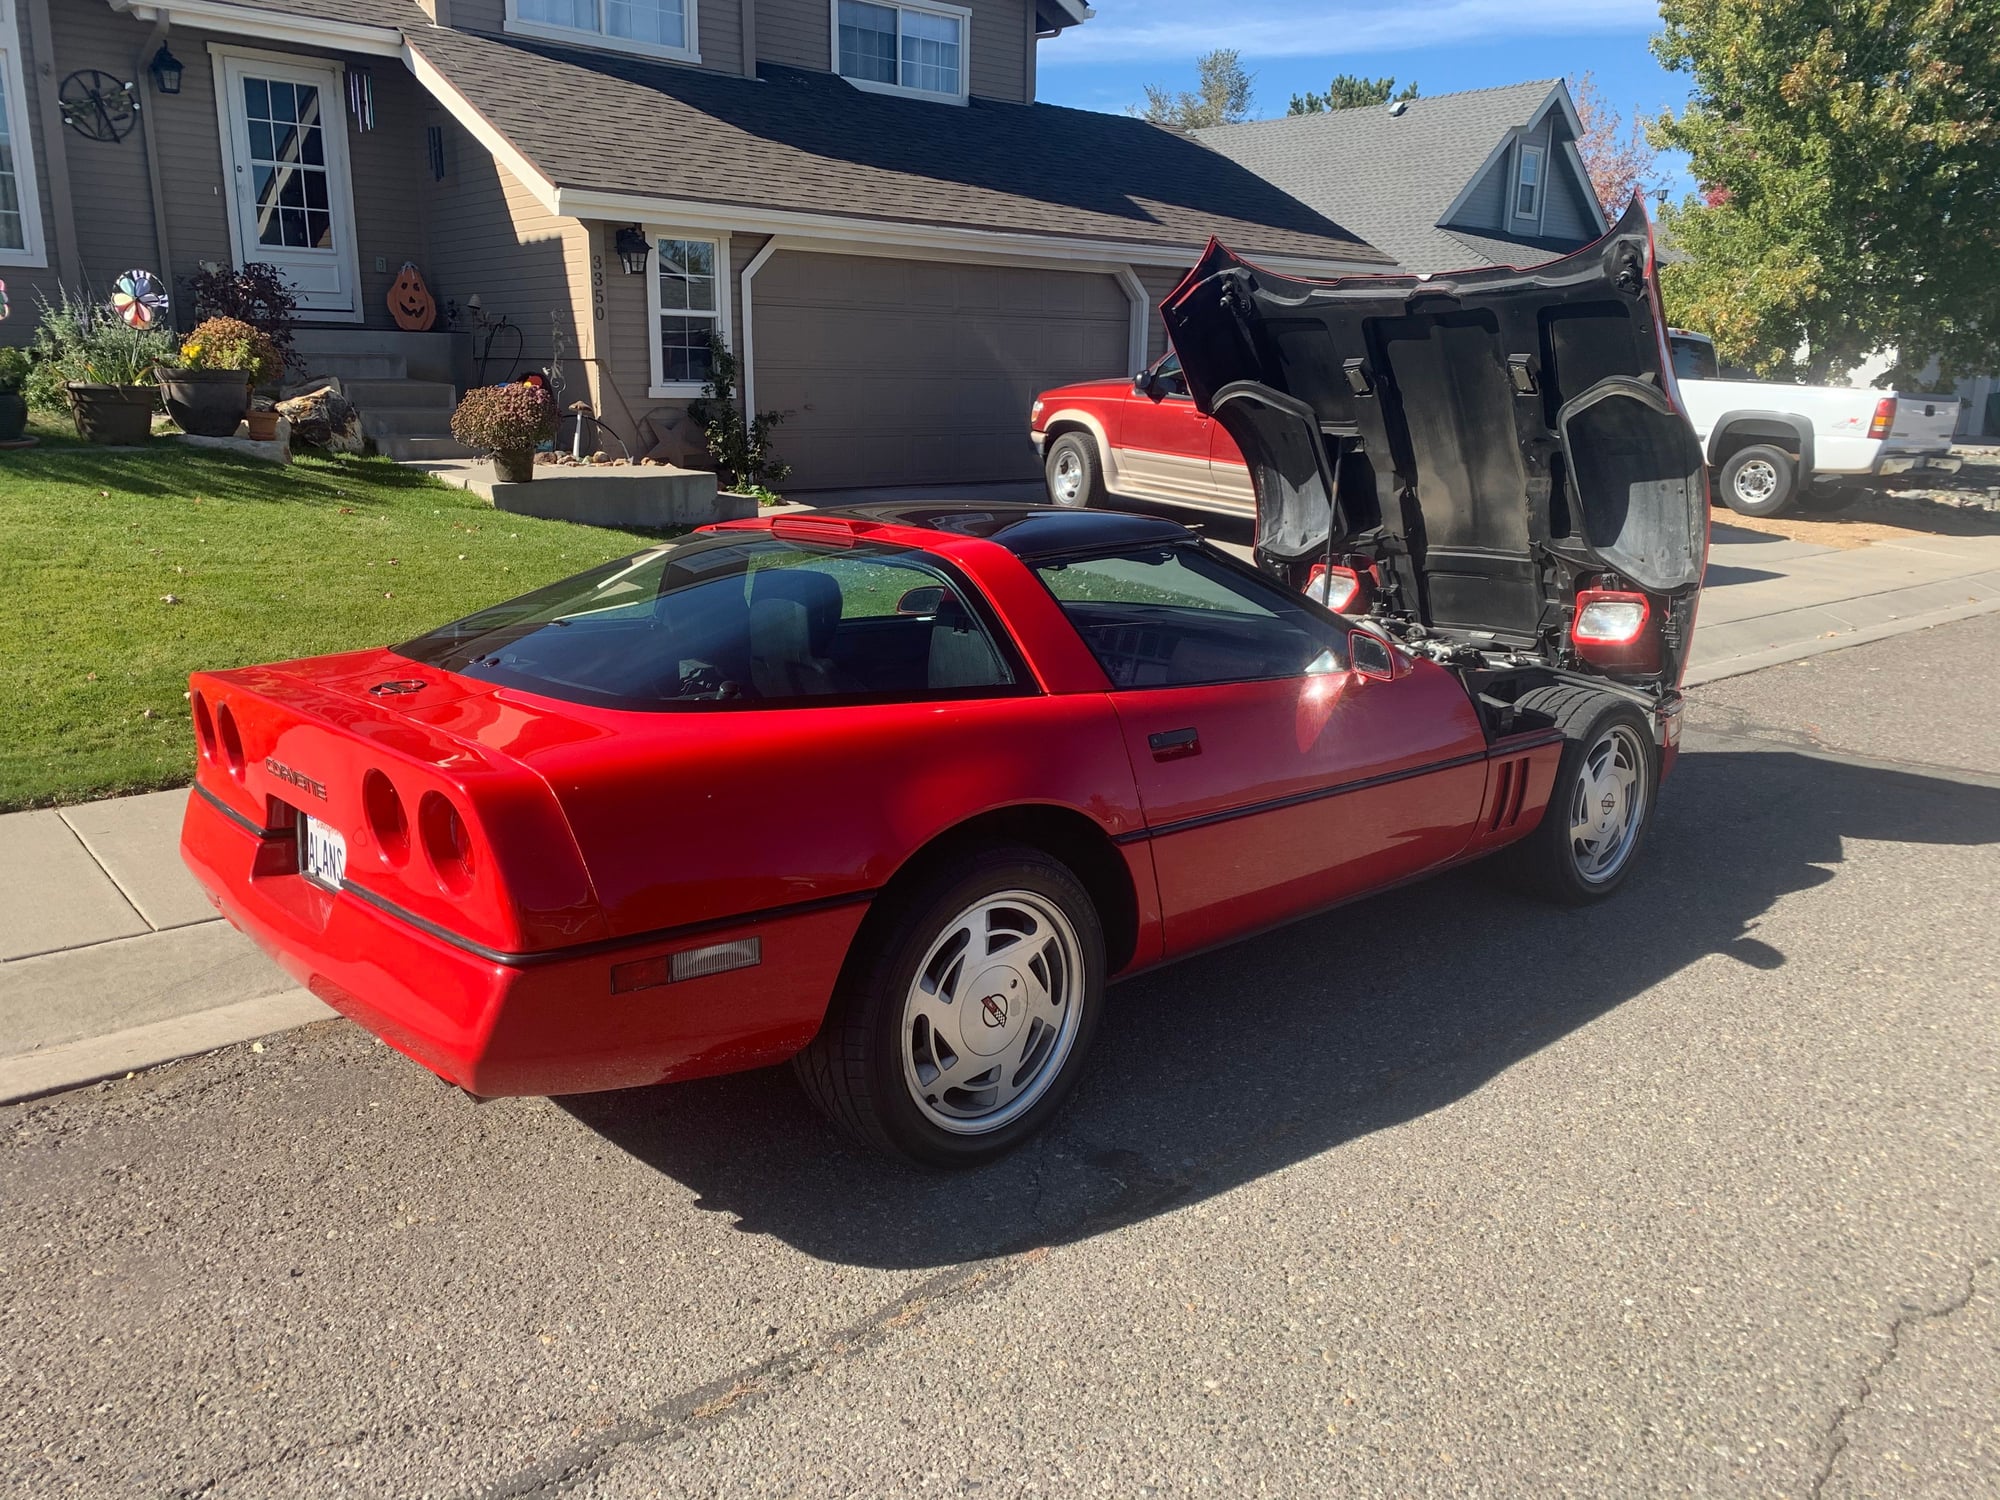 1989 Chevrolet Corvette - 1989 Chevy Corvette - Used - VIN 1G1YY2183K5106436 - 133,000 Miles - 8 cyl - 2WD - Automatic - Coupe - Red - Carson City, NV 89705, United States